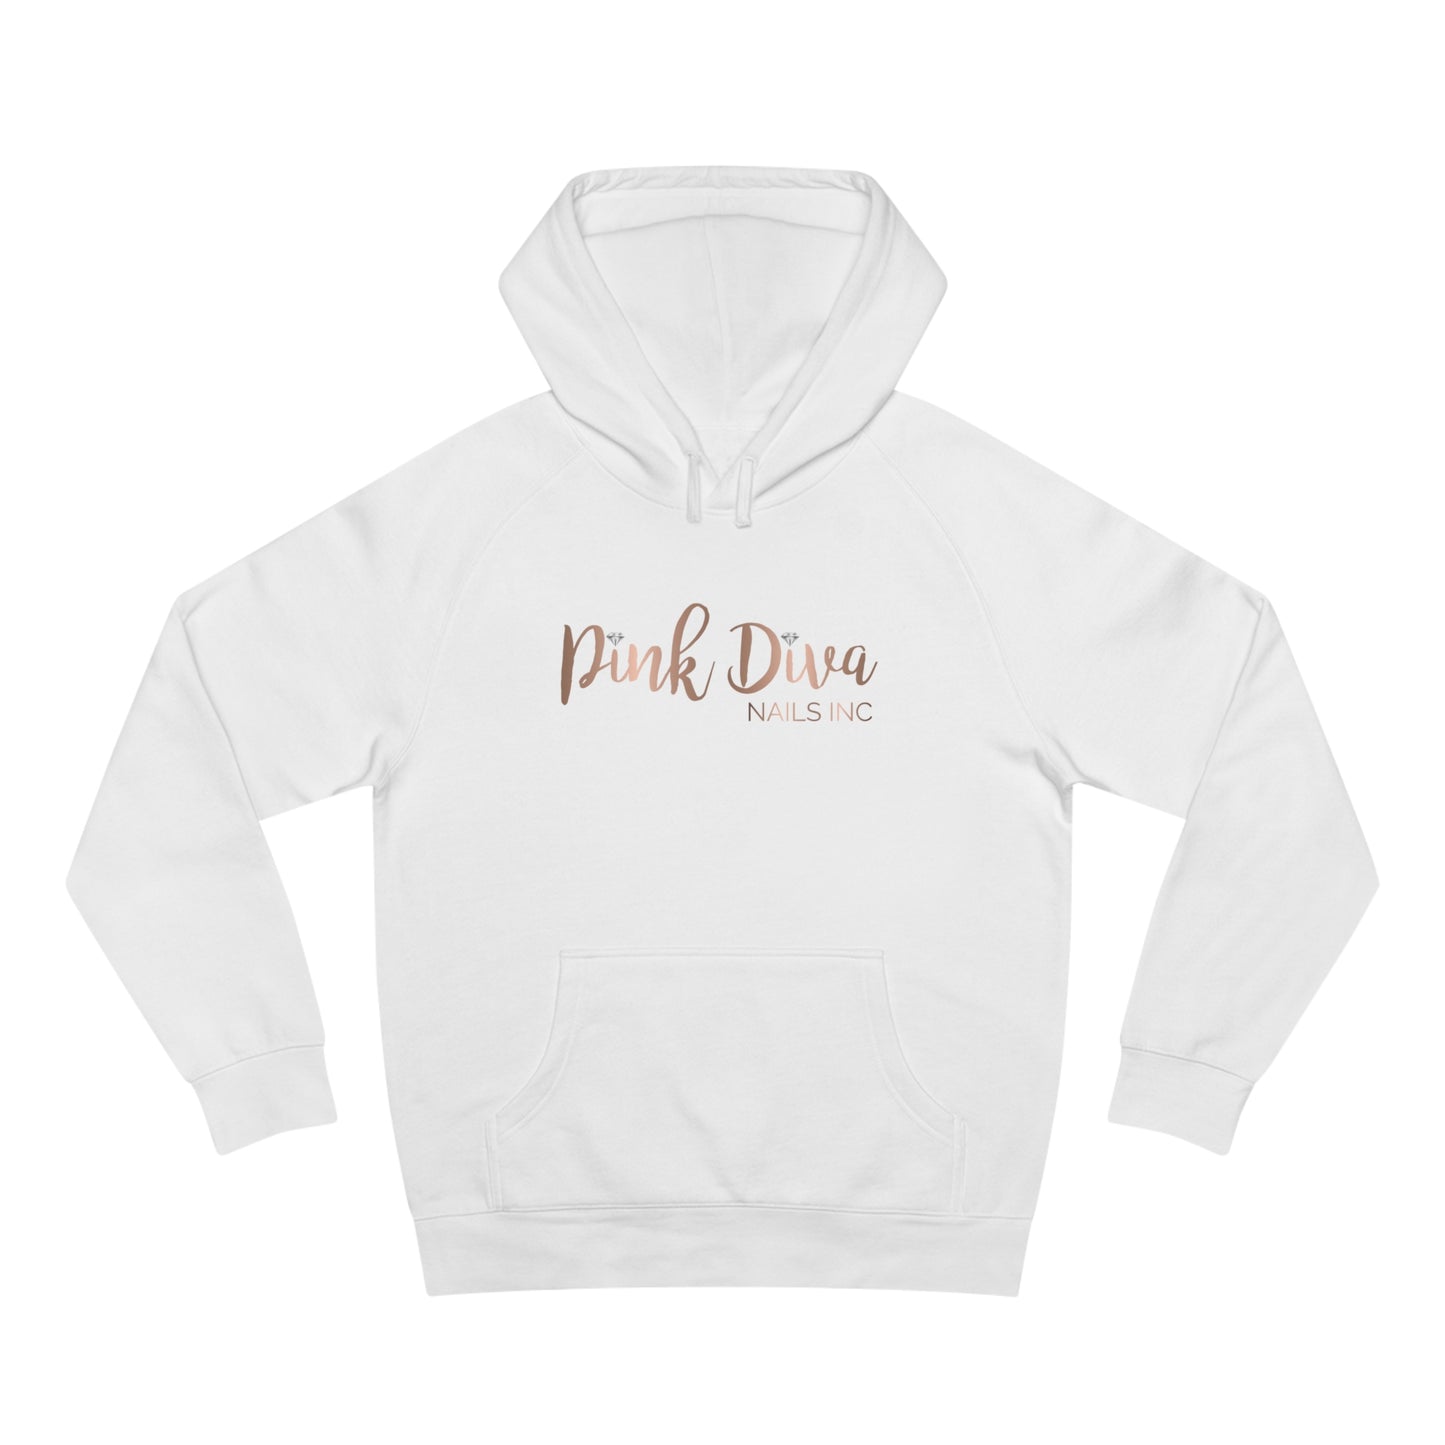 Our Logo Hoodie